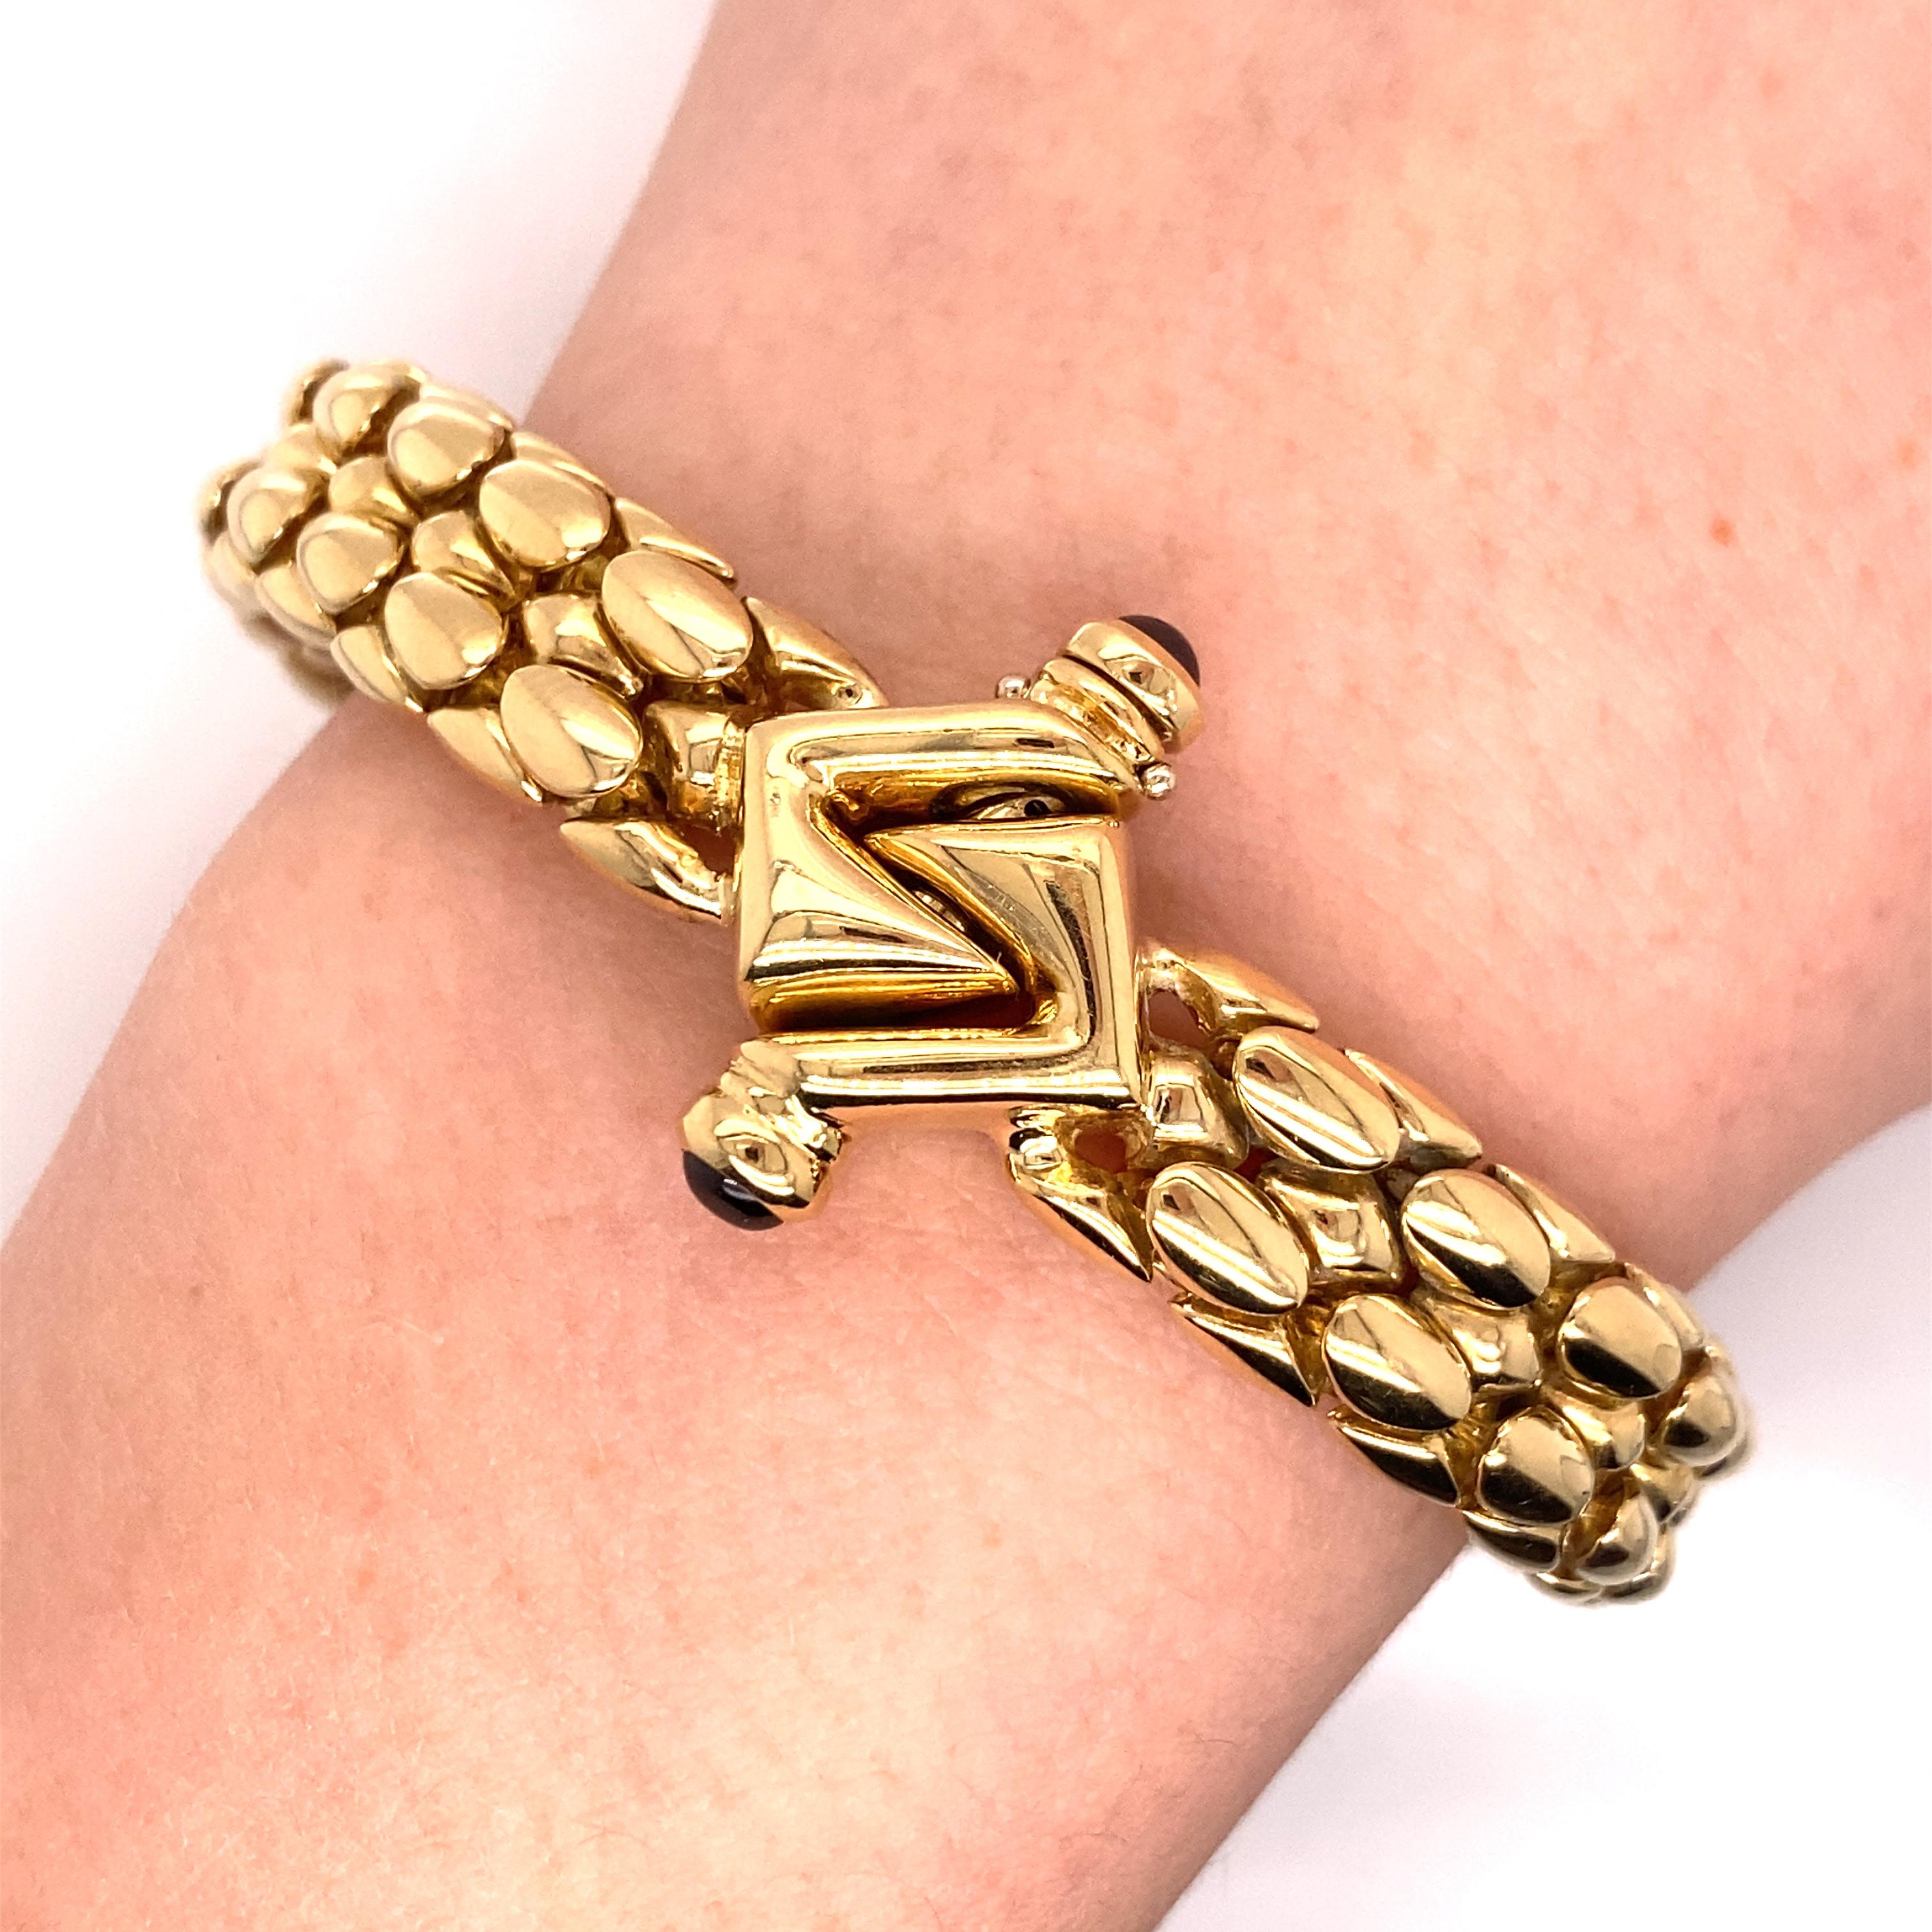 Vintage 1990's 18K Yellow Gold Italian Made Snake Skin Design Bracelet - The bracelet measures 3/8 inches wide and 7 1/2 inches long. The fancy clasp can be worn on the top or the bottom and features 2 cabuchon rubies. The bracelet feels very solid